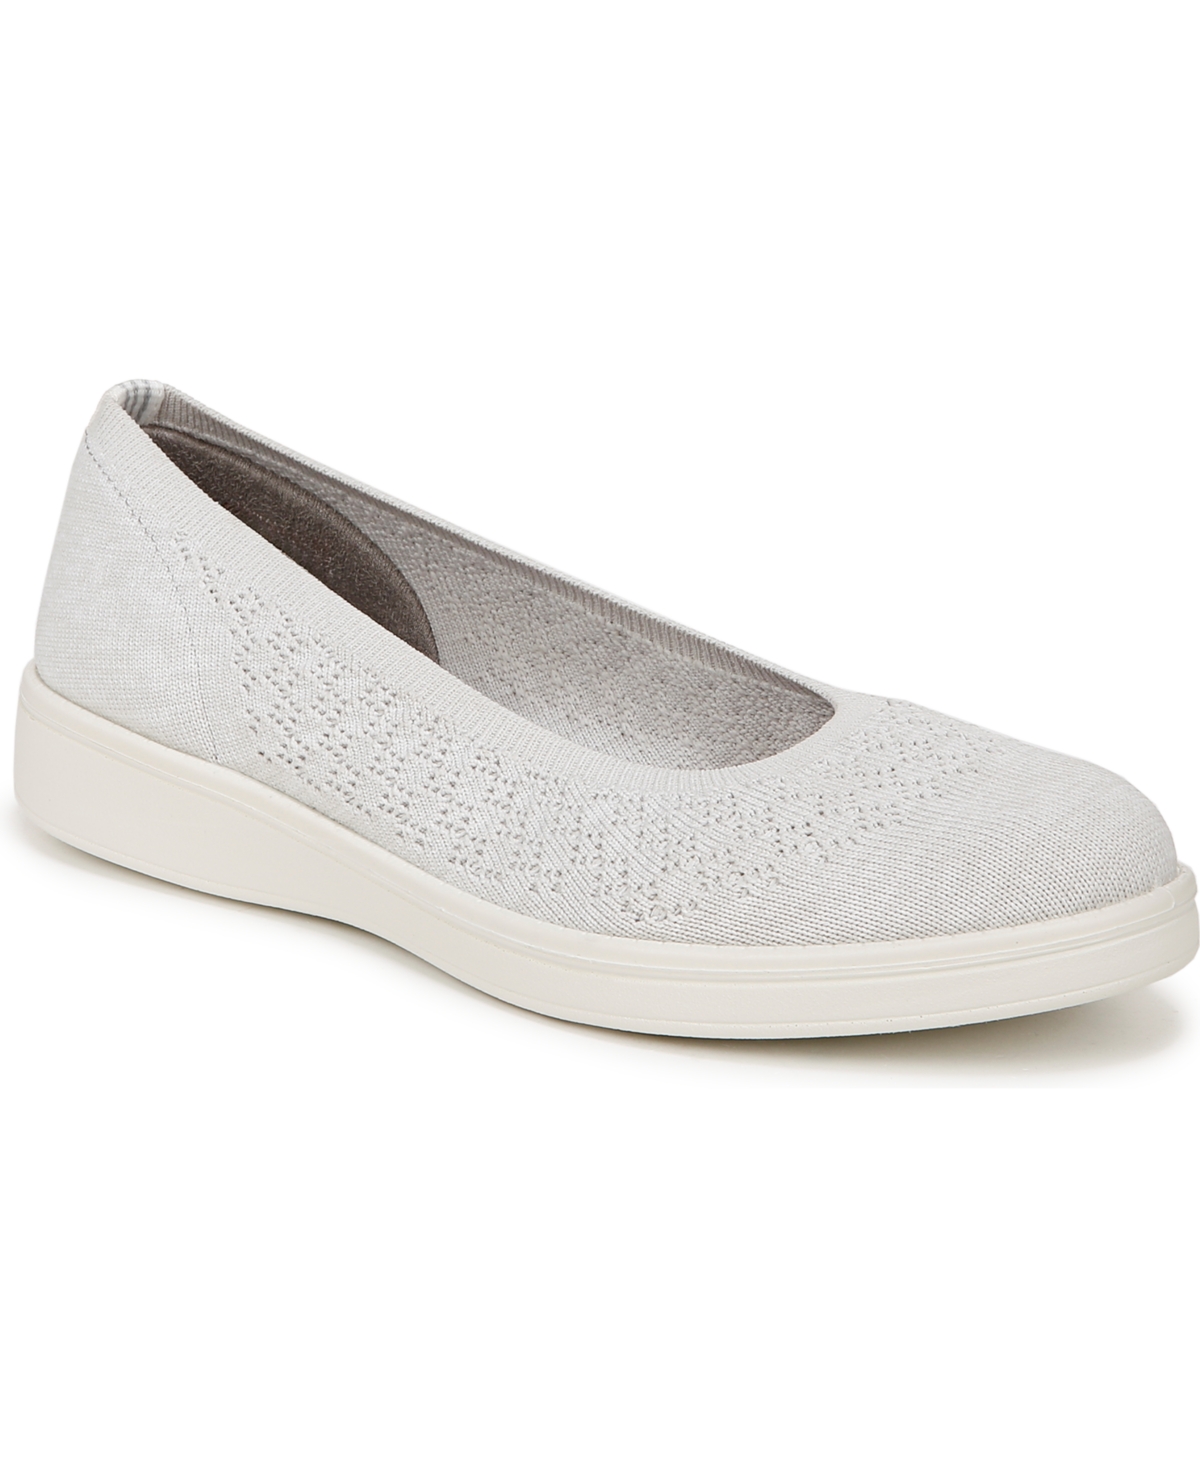 Atlantic Washable Slip Ons - Oyster Sand Knit